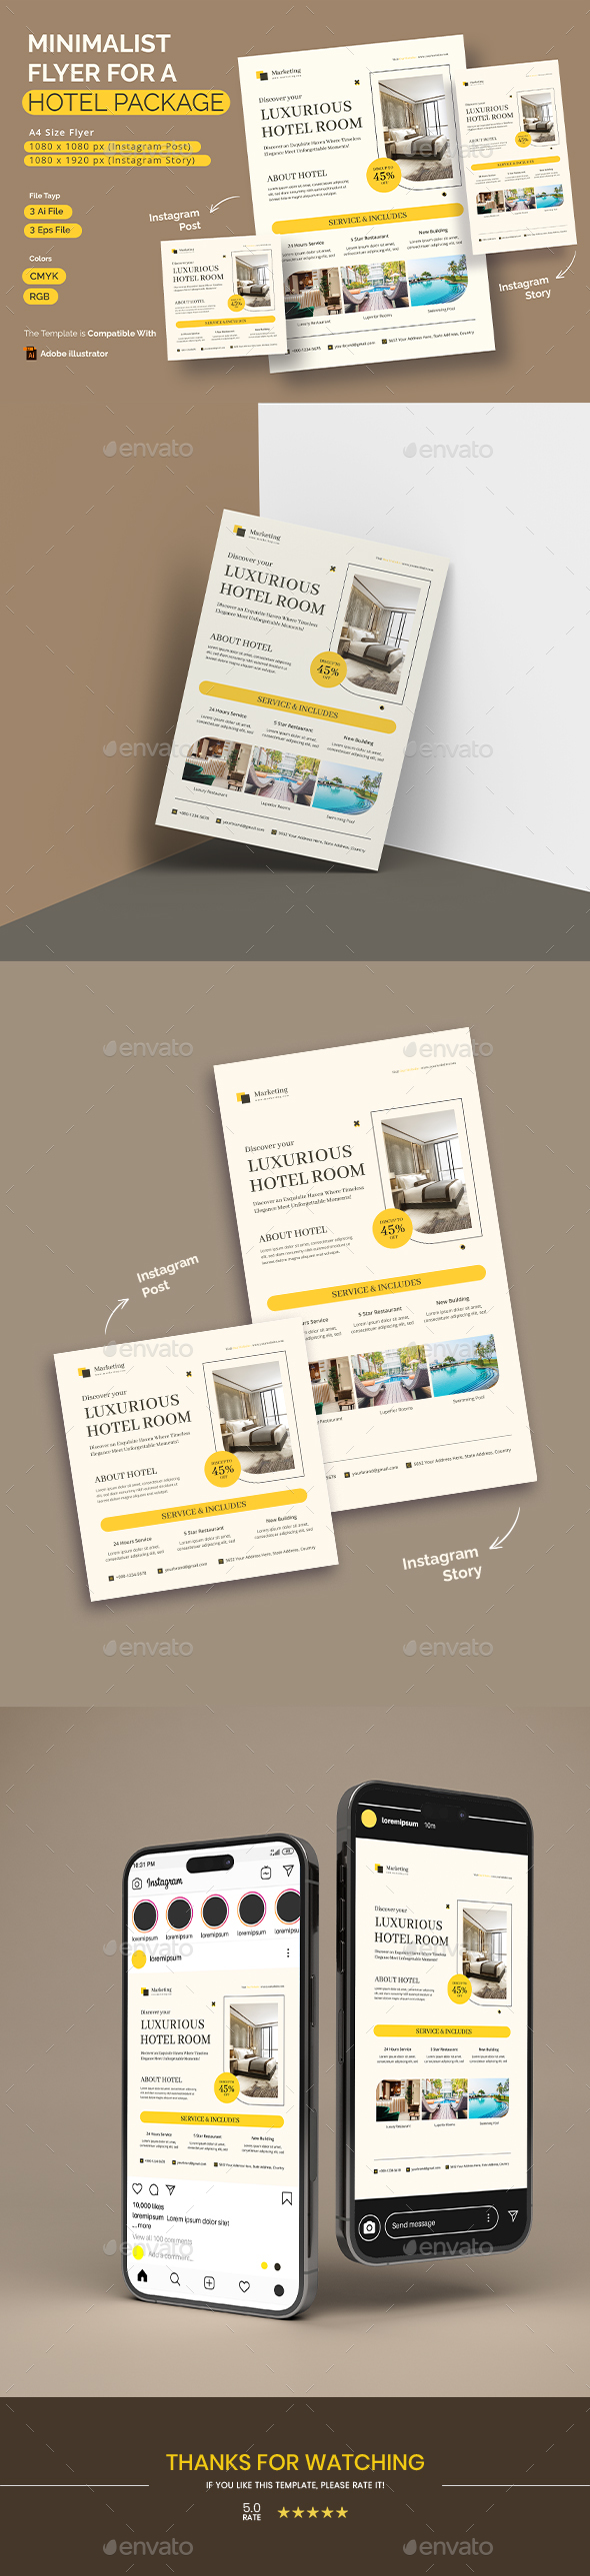 Minimalist Flyer For A Hotel Package